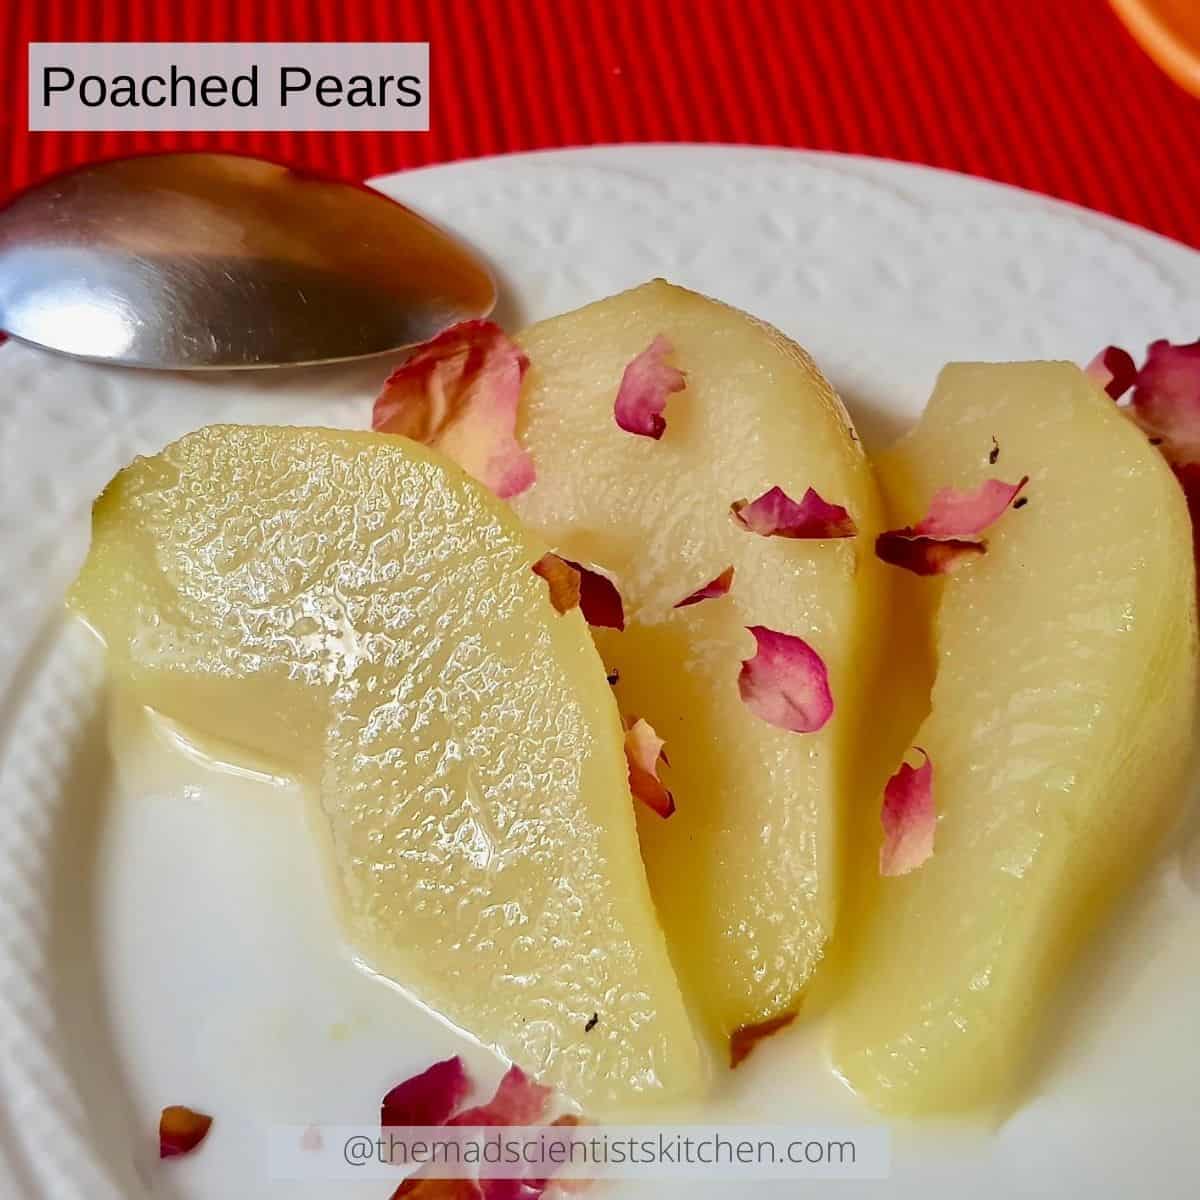 Simple dessert of Poached Pears